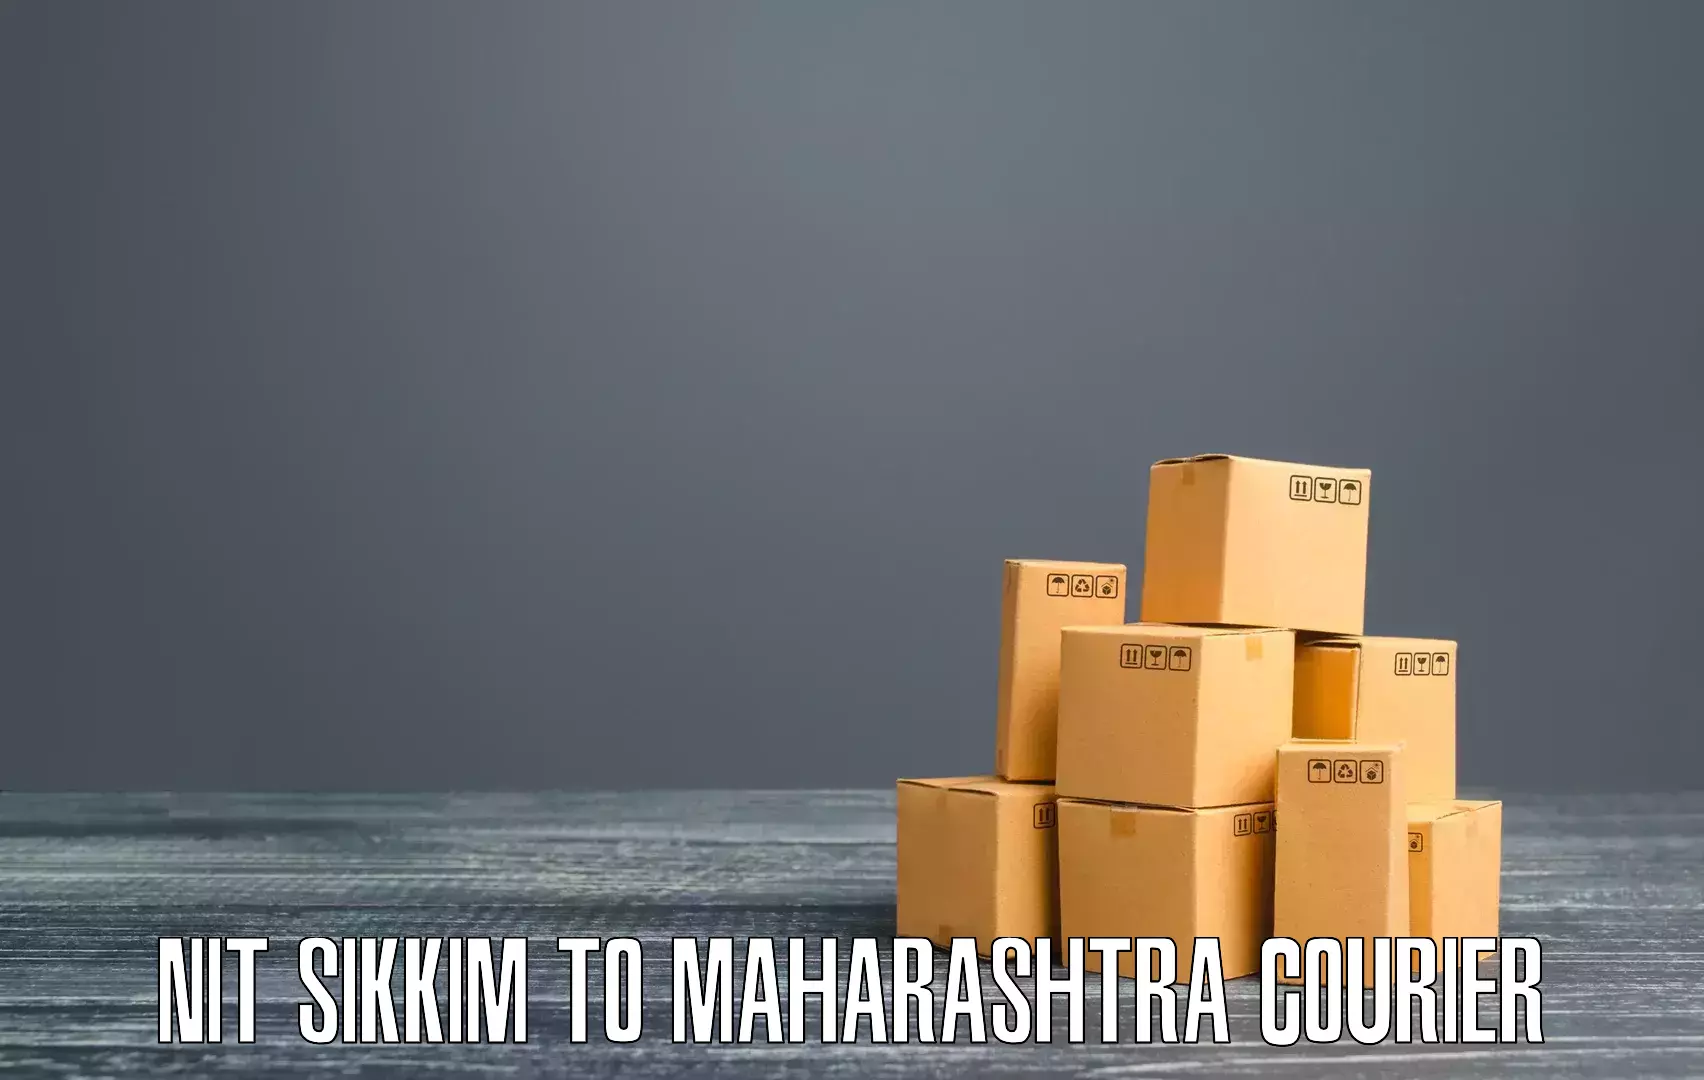 Customer-oriented courier services NIT Sikkim to Borivali